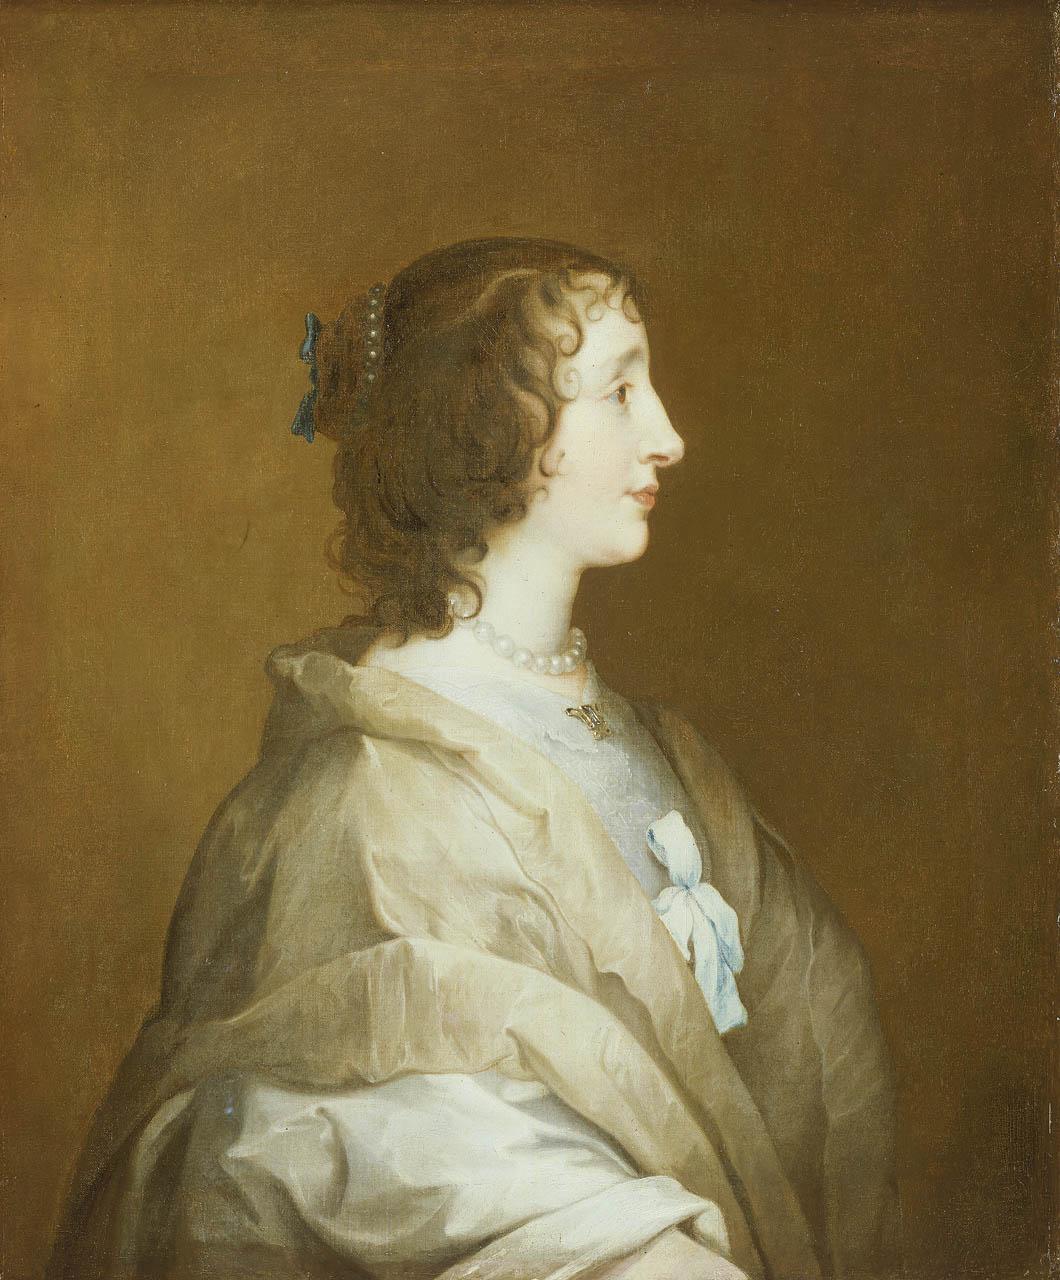 painting side portrait of a woman